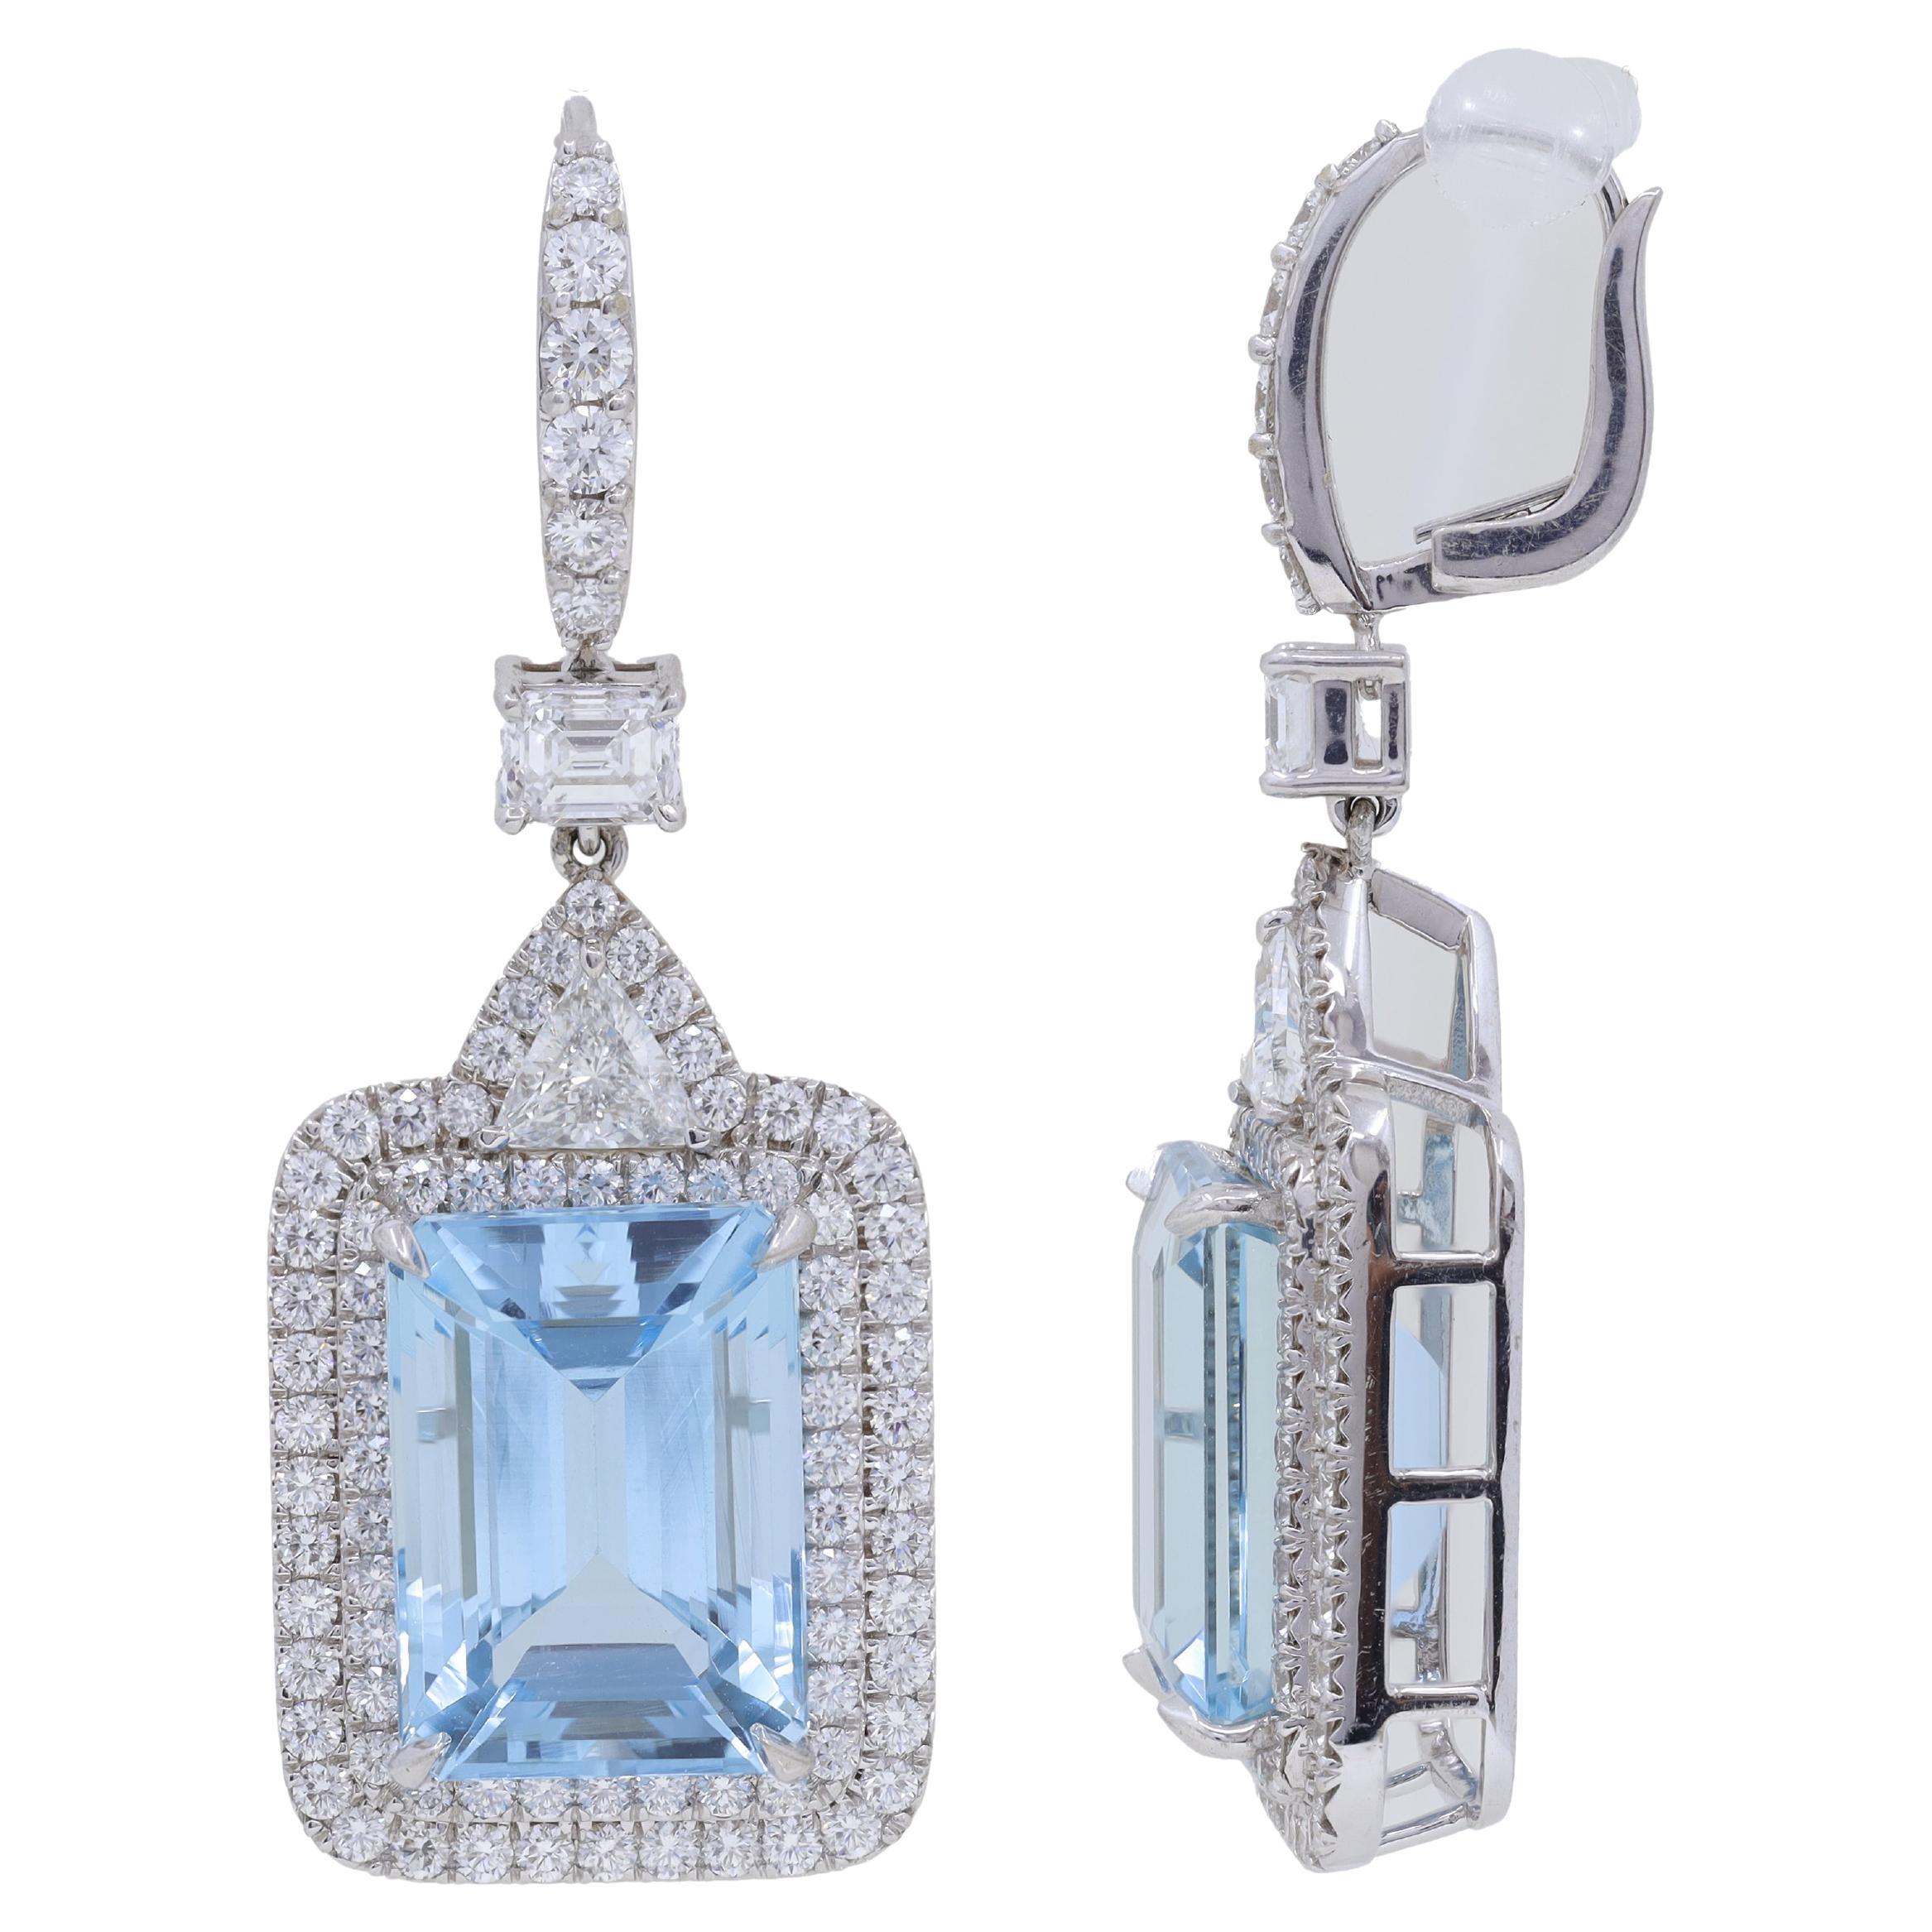 18 kt white gold fashion earring featuring 2.66 cts tw aquamarine surrounded by 2 layers of 8.00 cts tw of diamonds.
Diana M. is a leading supplier of top-quality fine jewelry for over 35 years.
Diana M is one-stop shop for all your jewelry